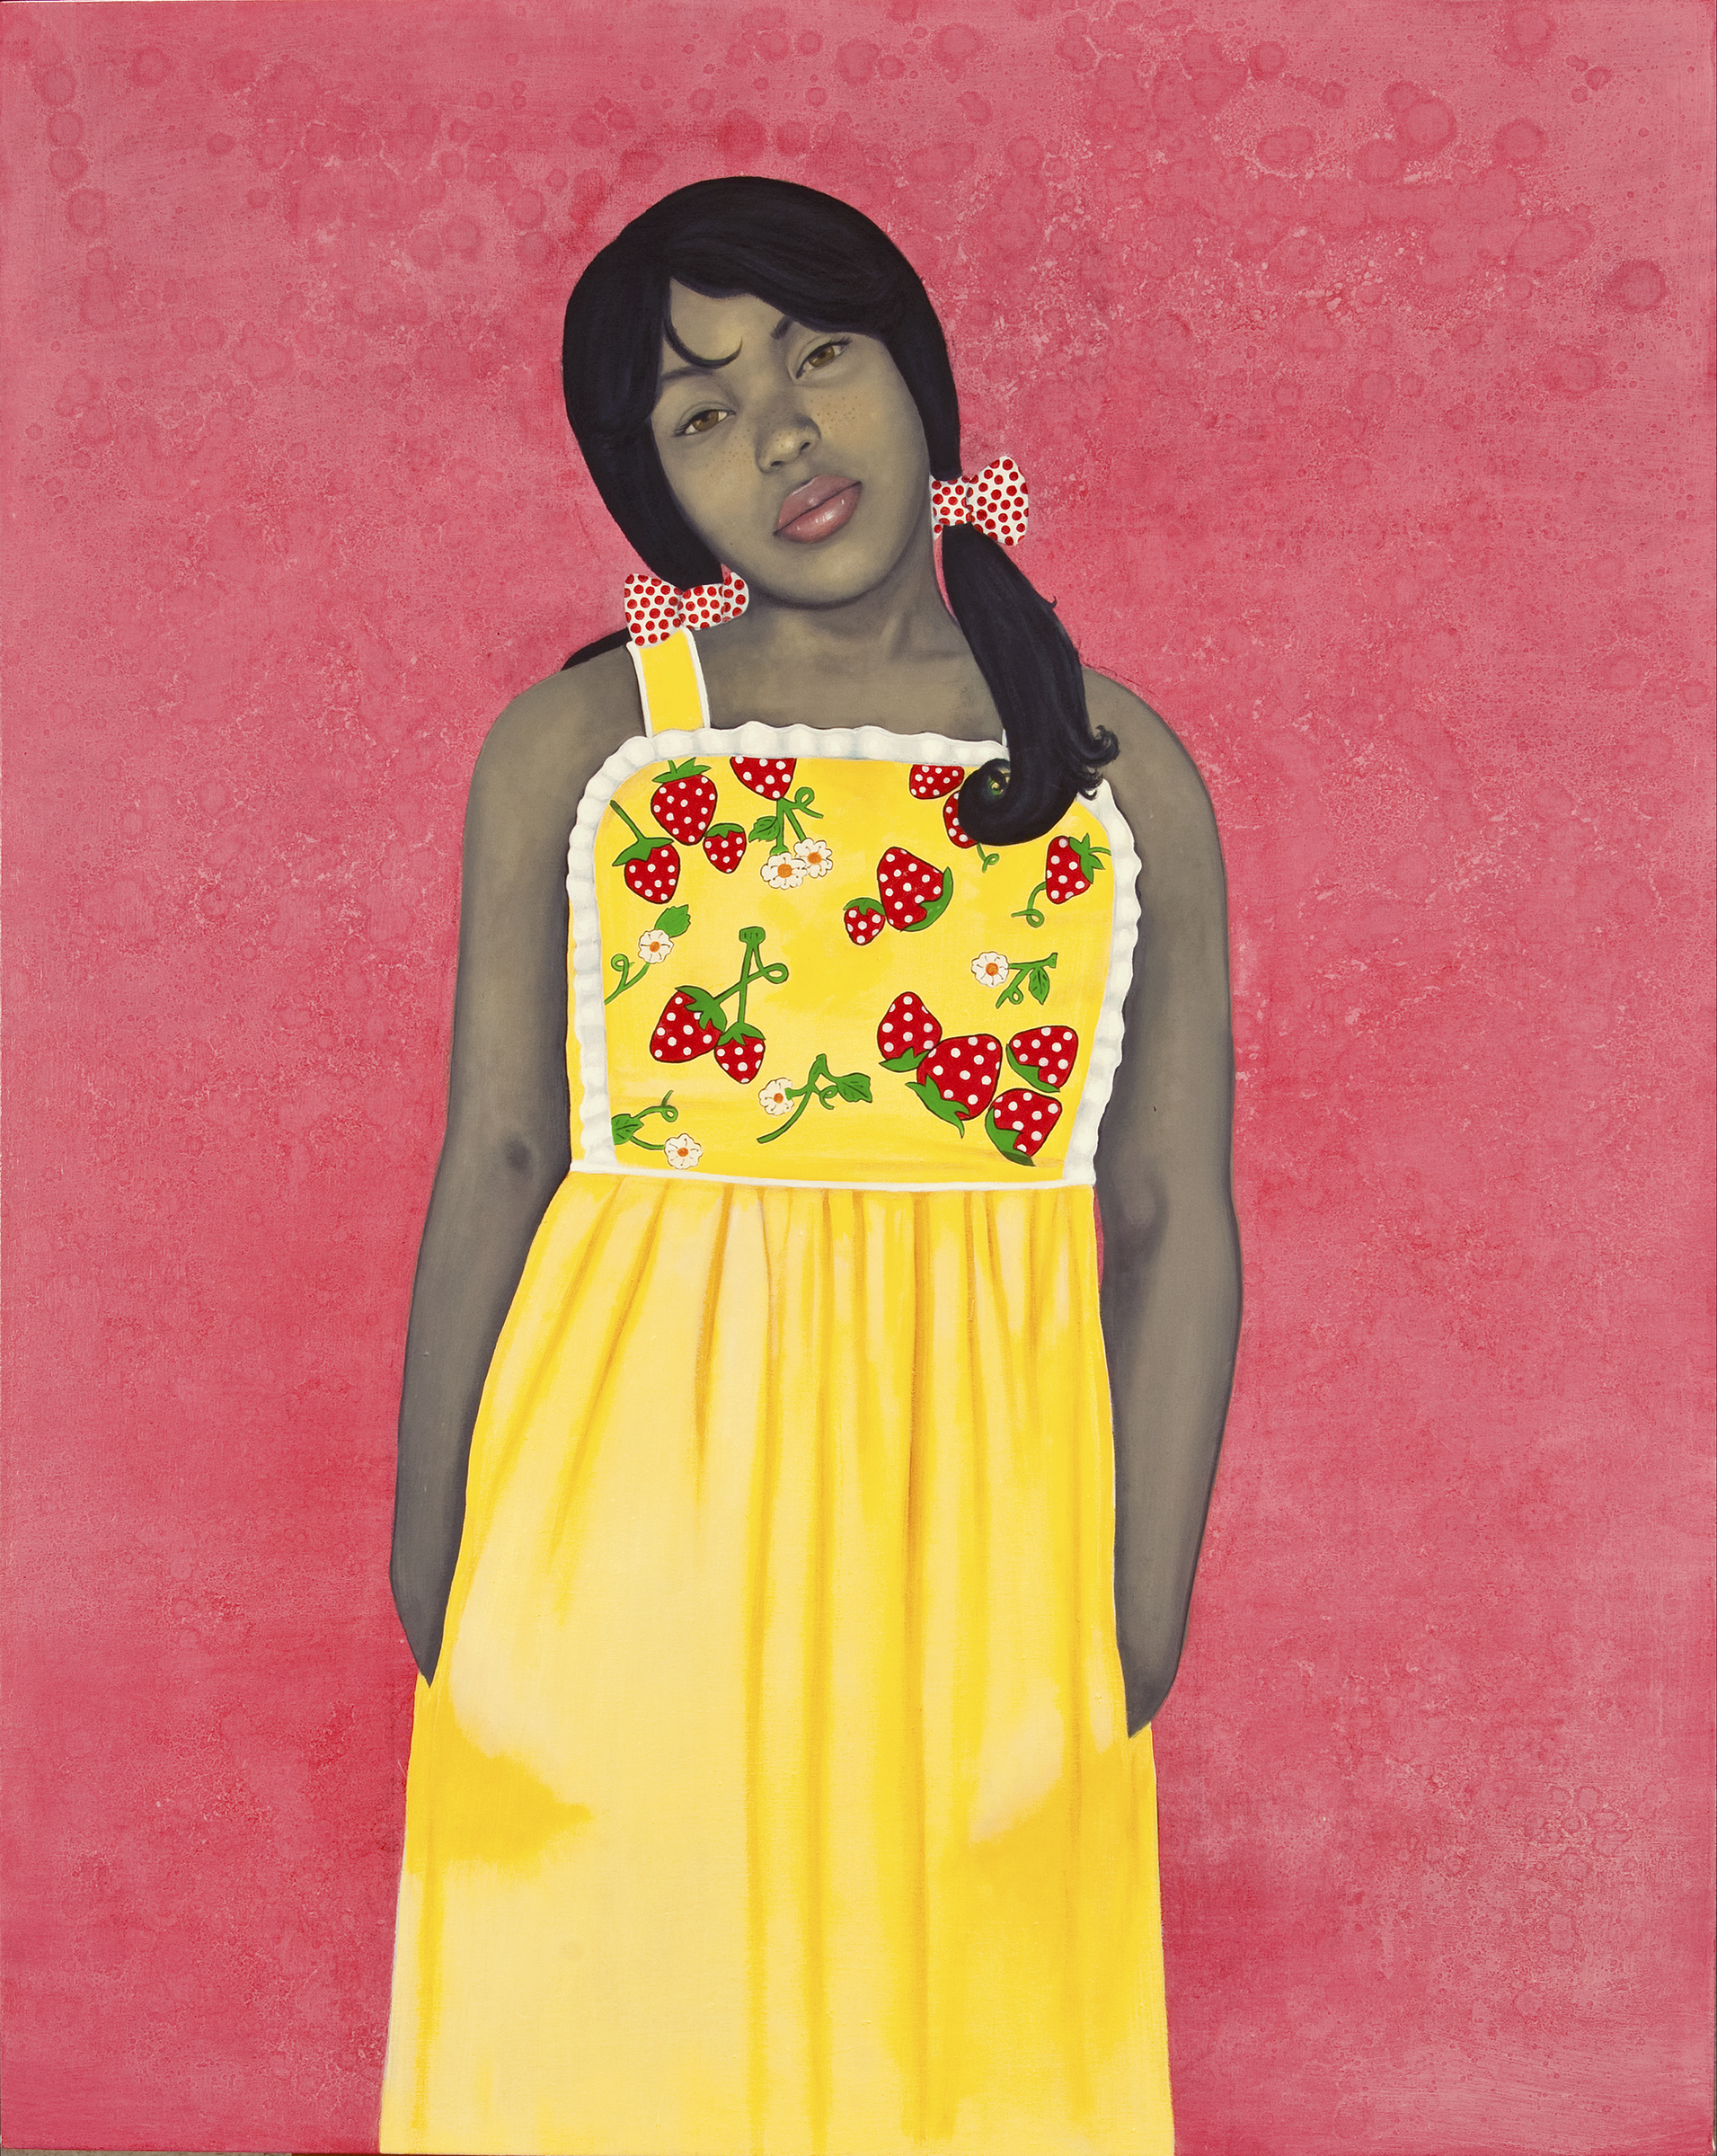 They call me Redbone but I’d rather be Strawberry Shortcake by Amy Sherald - 2009 - 54 x 43 pouces (137 x 109 cm) 